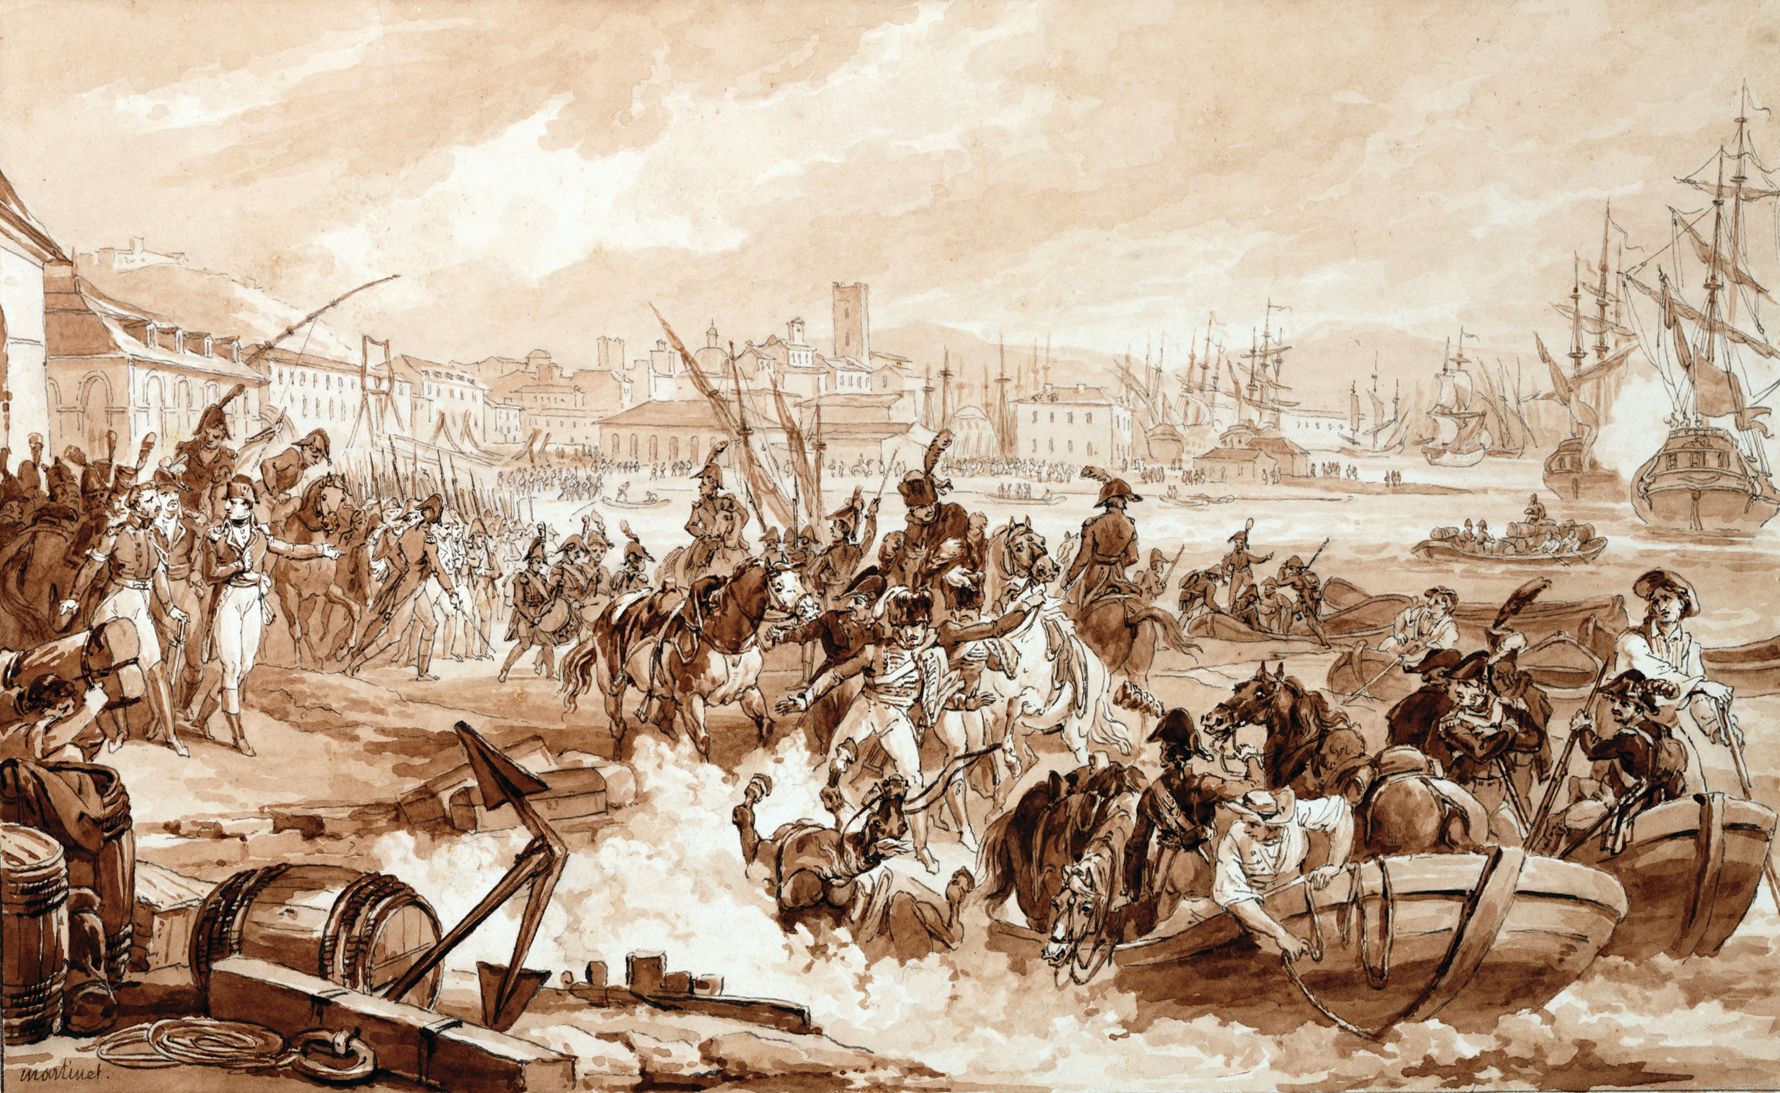 French troops embark at Toulon. Bonaparte, shown at left, played a game of cat and mouse with Rear Admiral Sir Horatio Nelson’s squadron of the British fleet in the Mediterranean Sea.